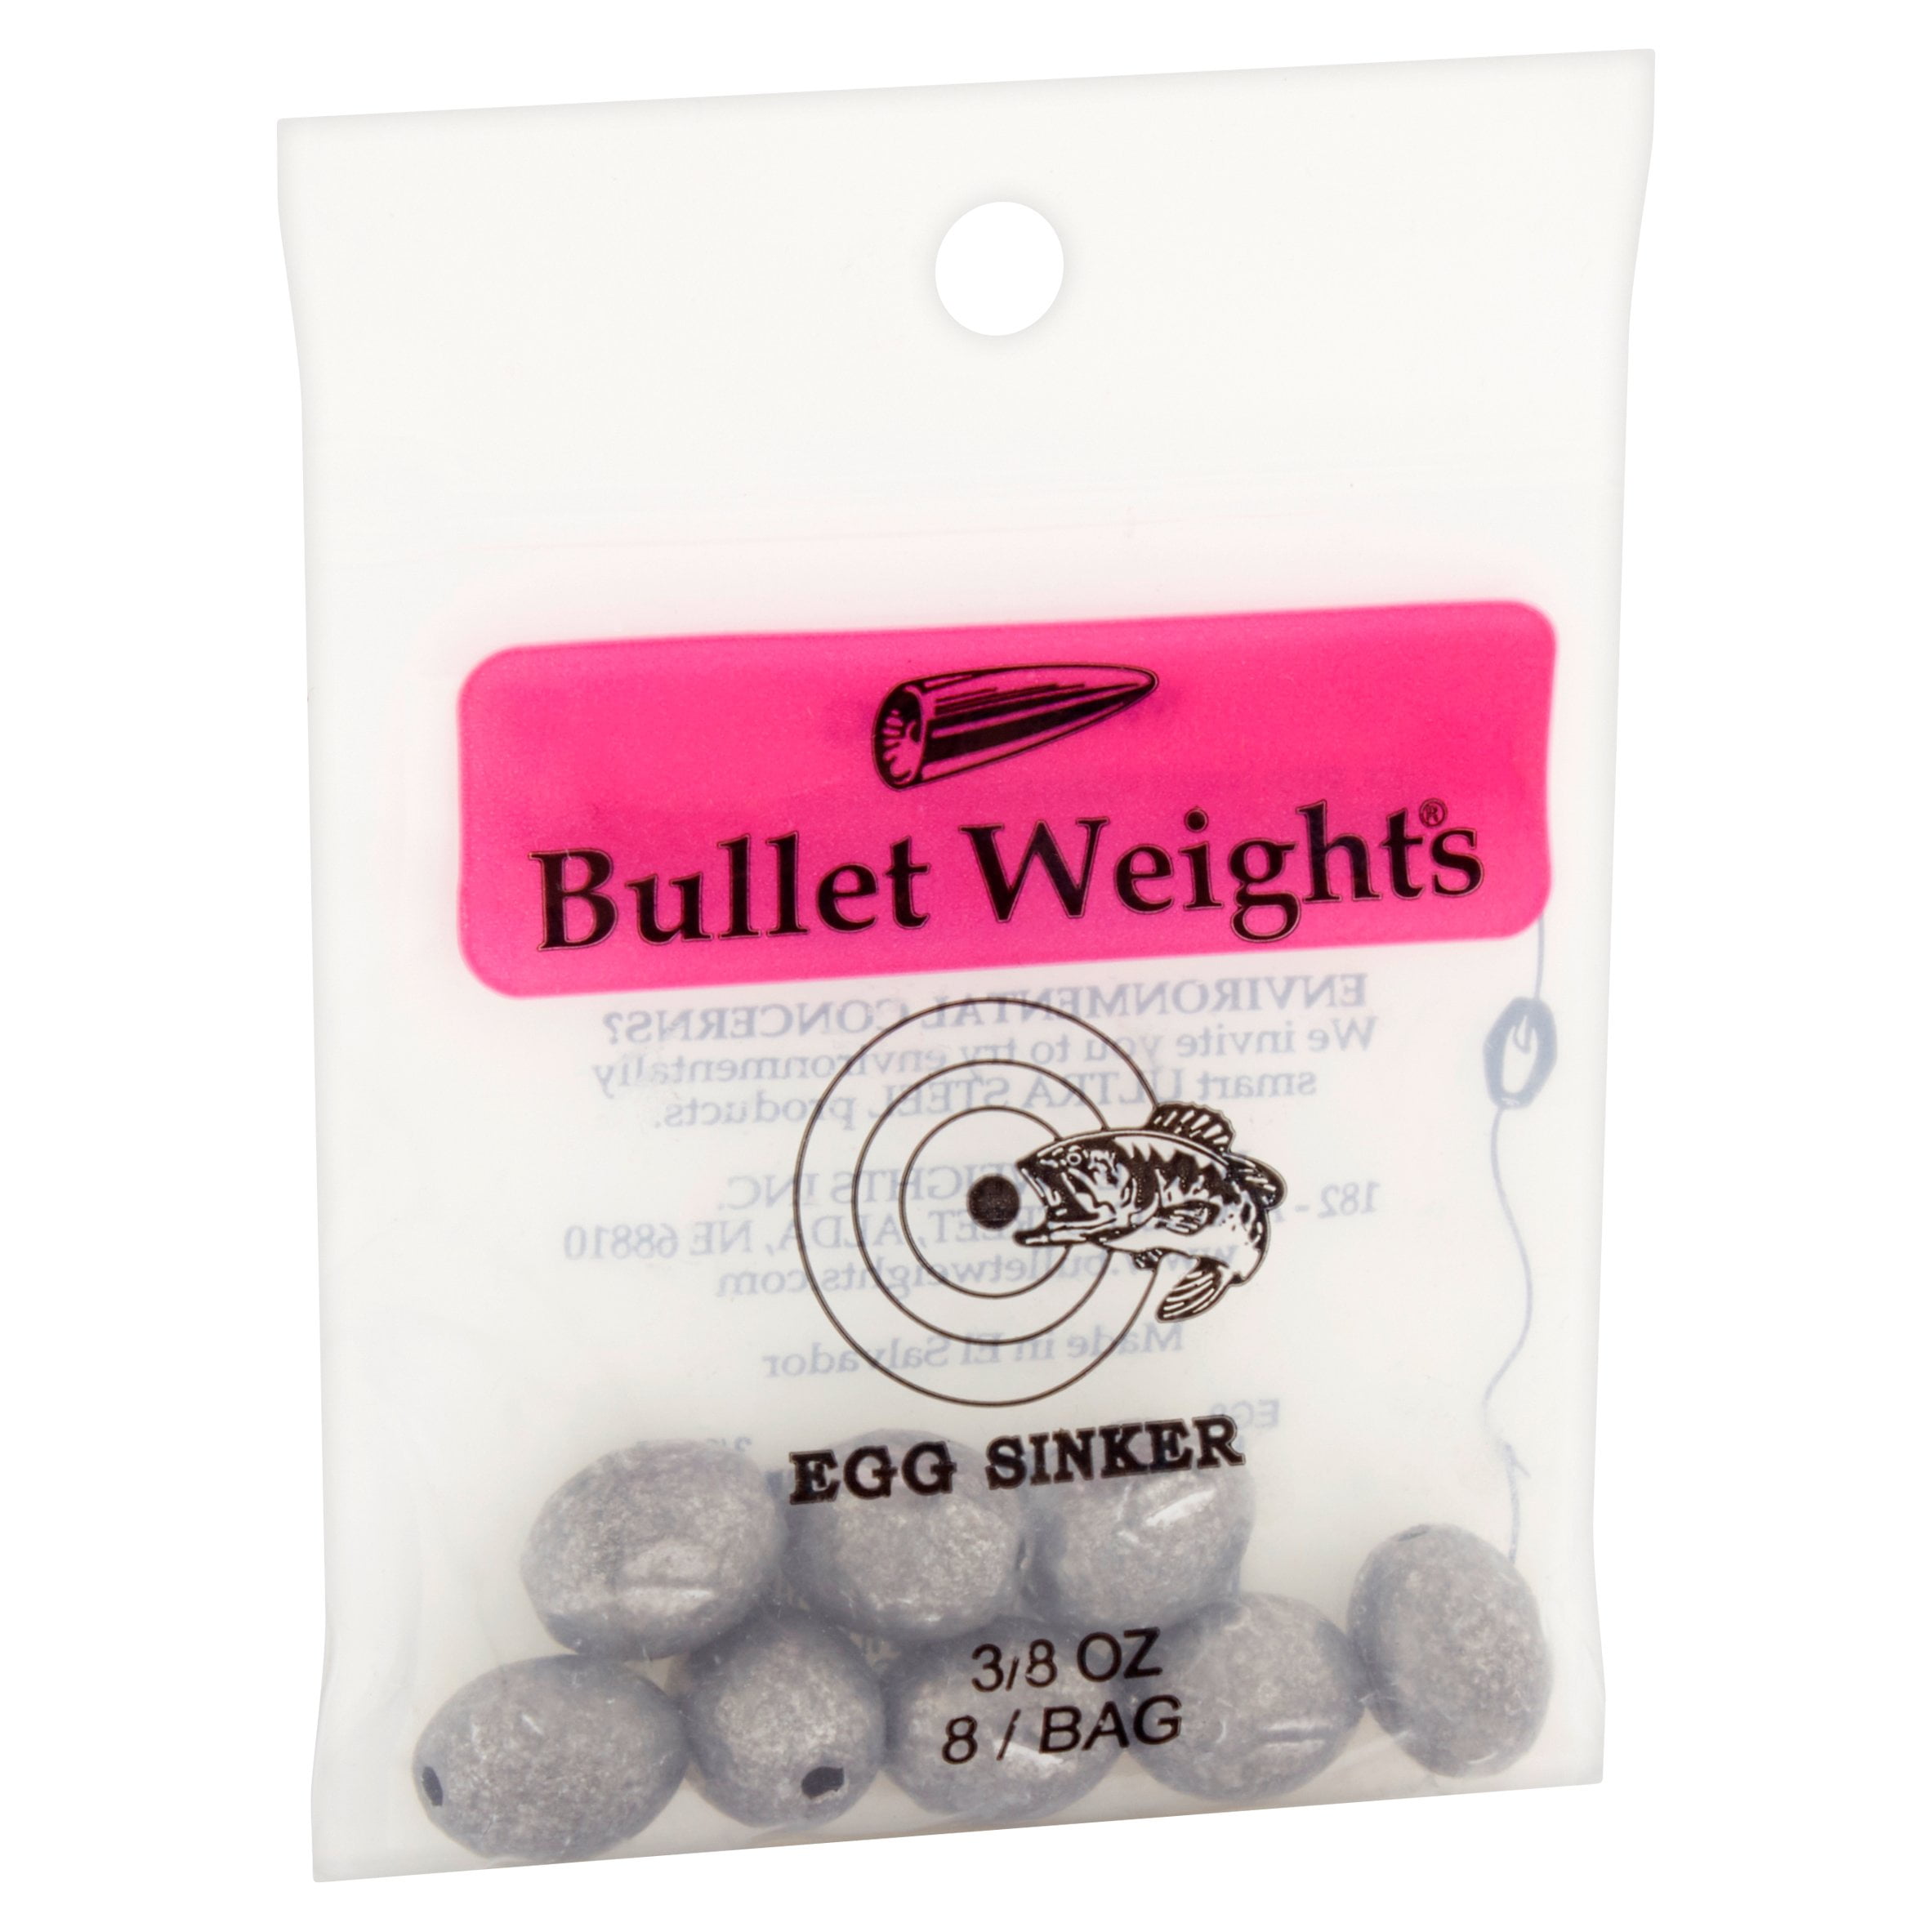 Bullet Weights® EG8-24 Lead Egg Sinker Size 3/8 oz Fishing Weights 